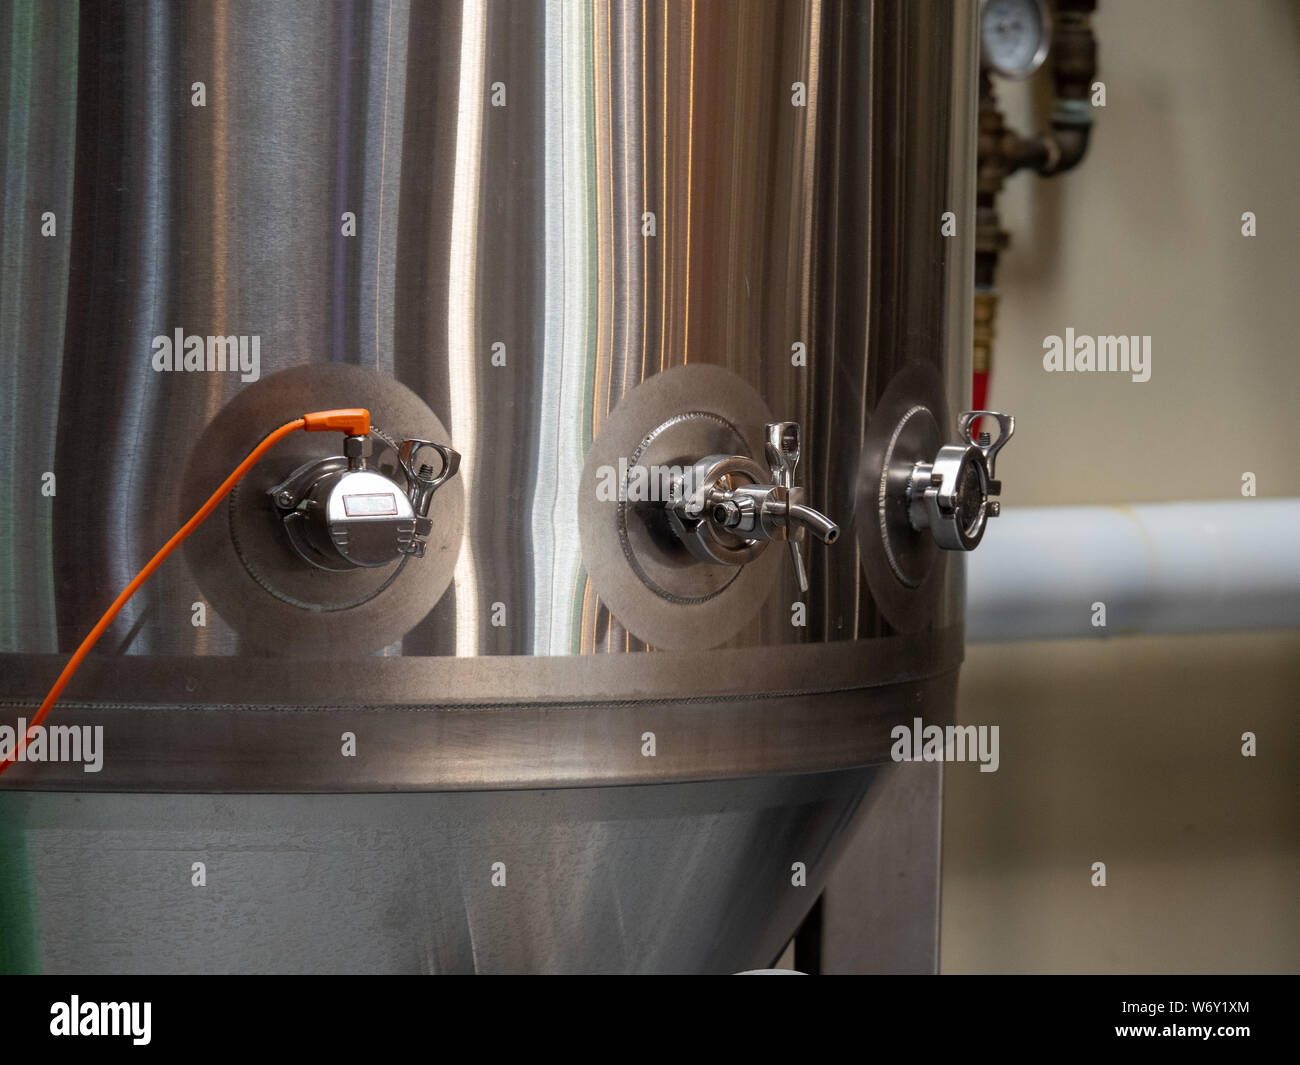 Stainless steel fermentation tank producing beer at a brewery Stock Photo